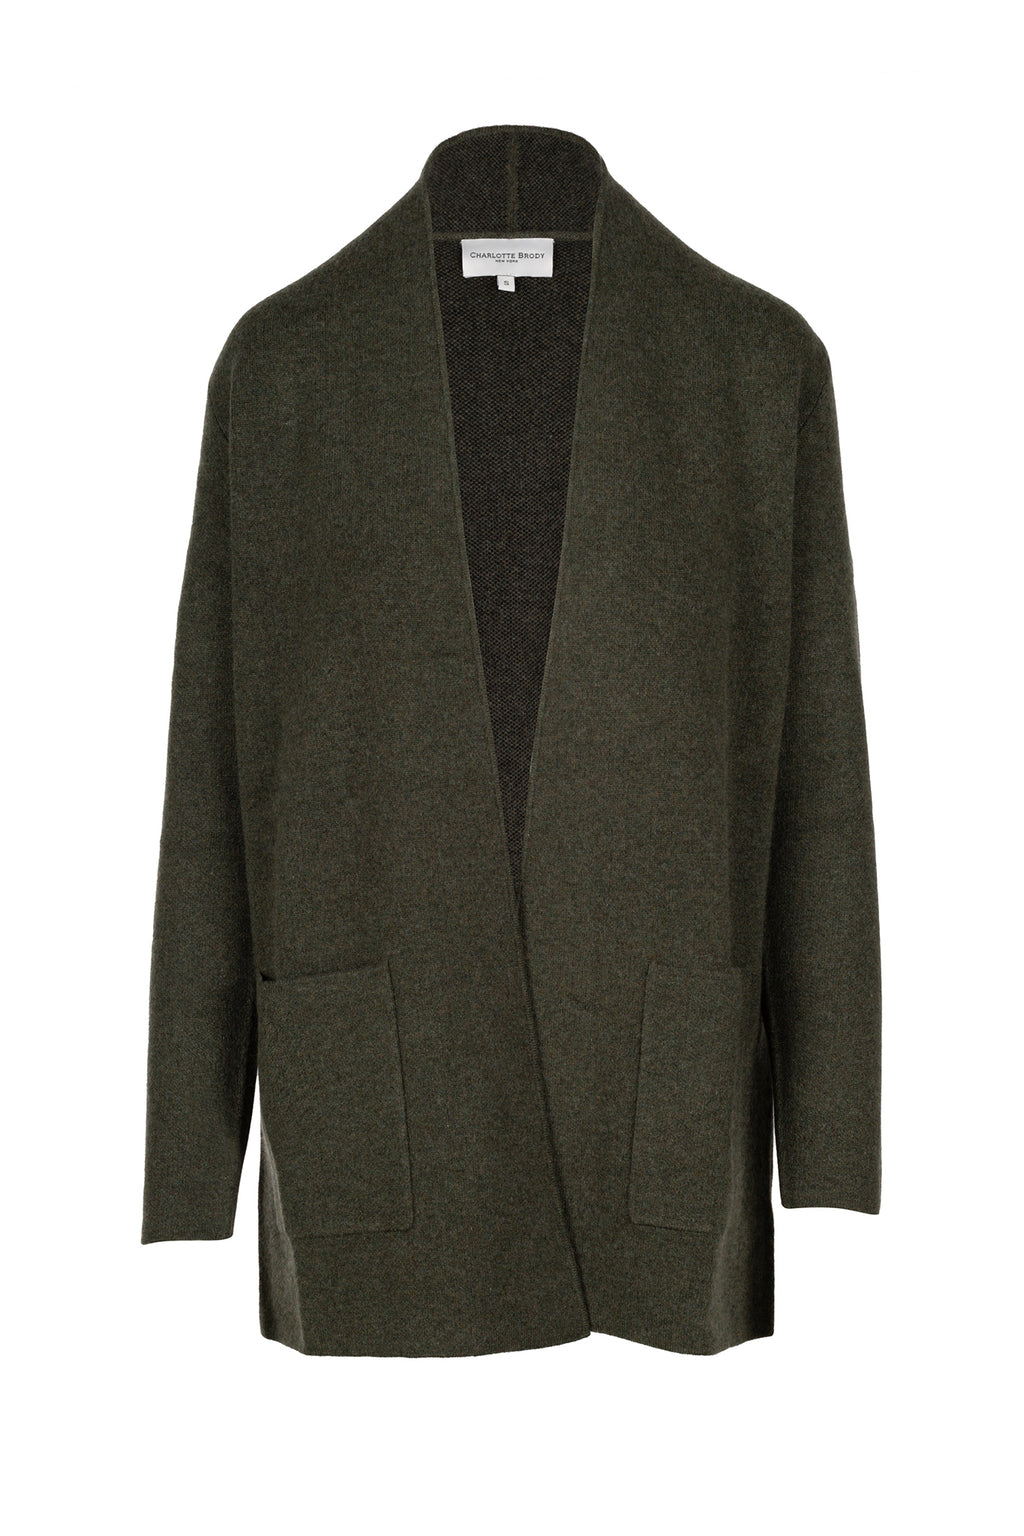 Double Knit Cardigan - Olive